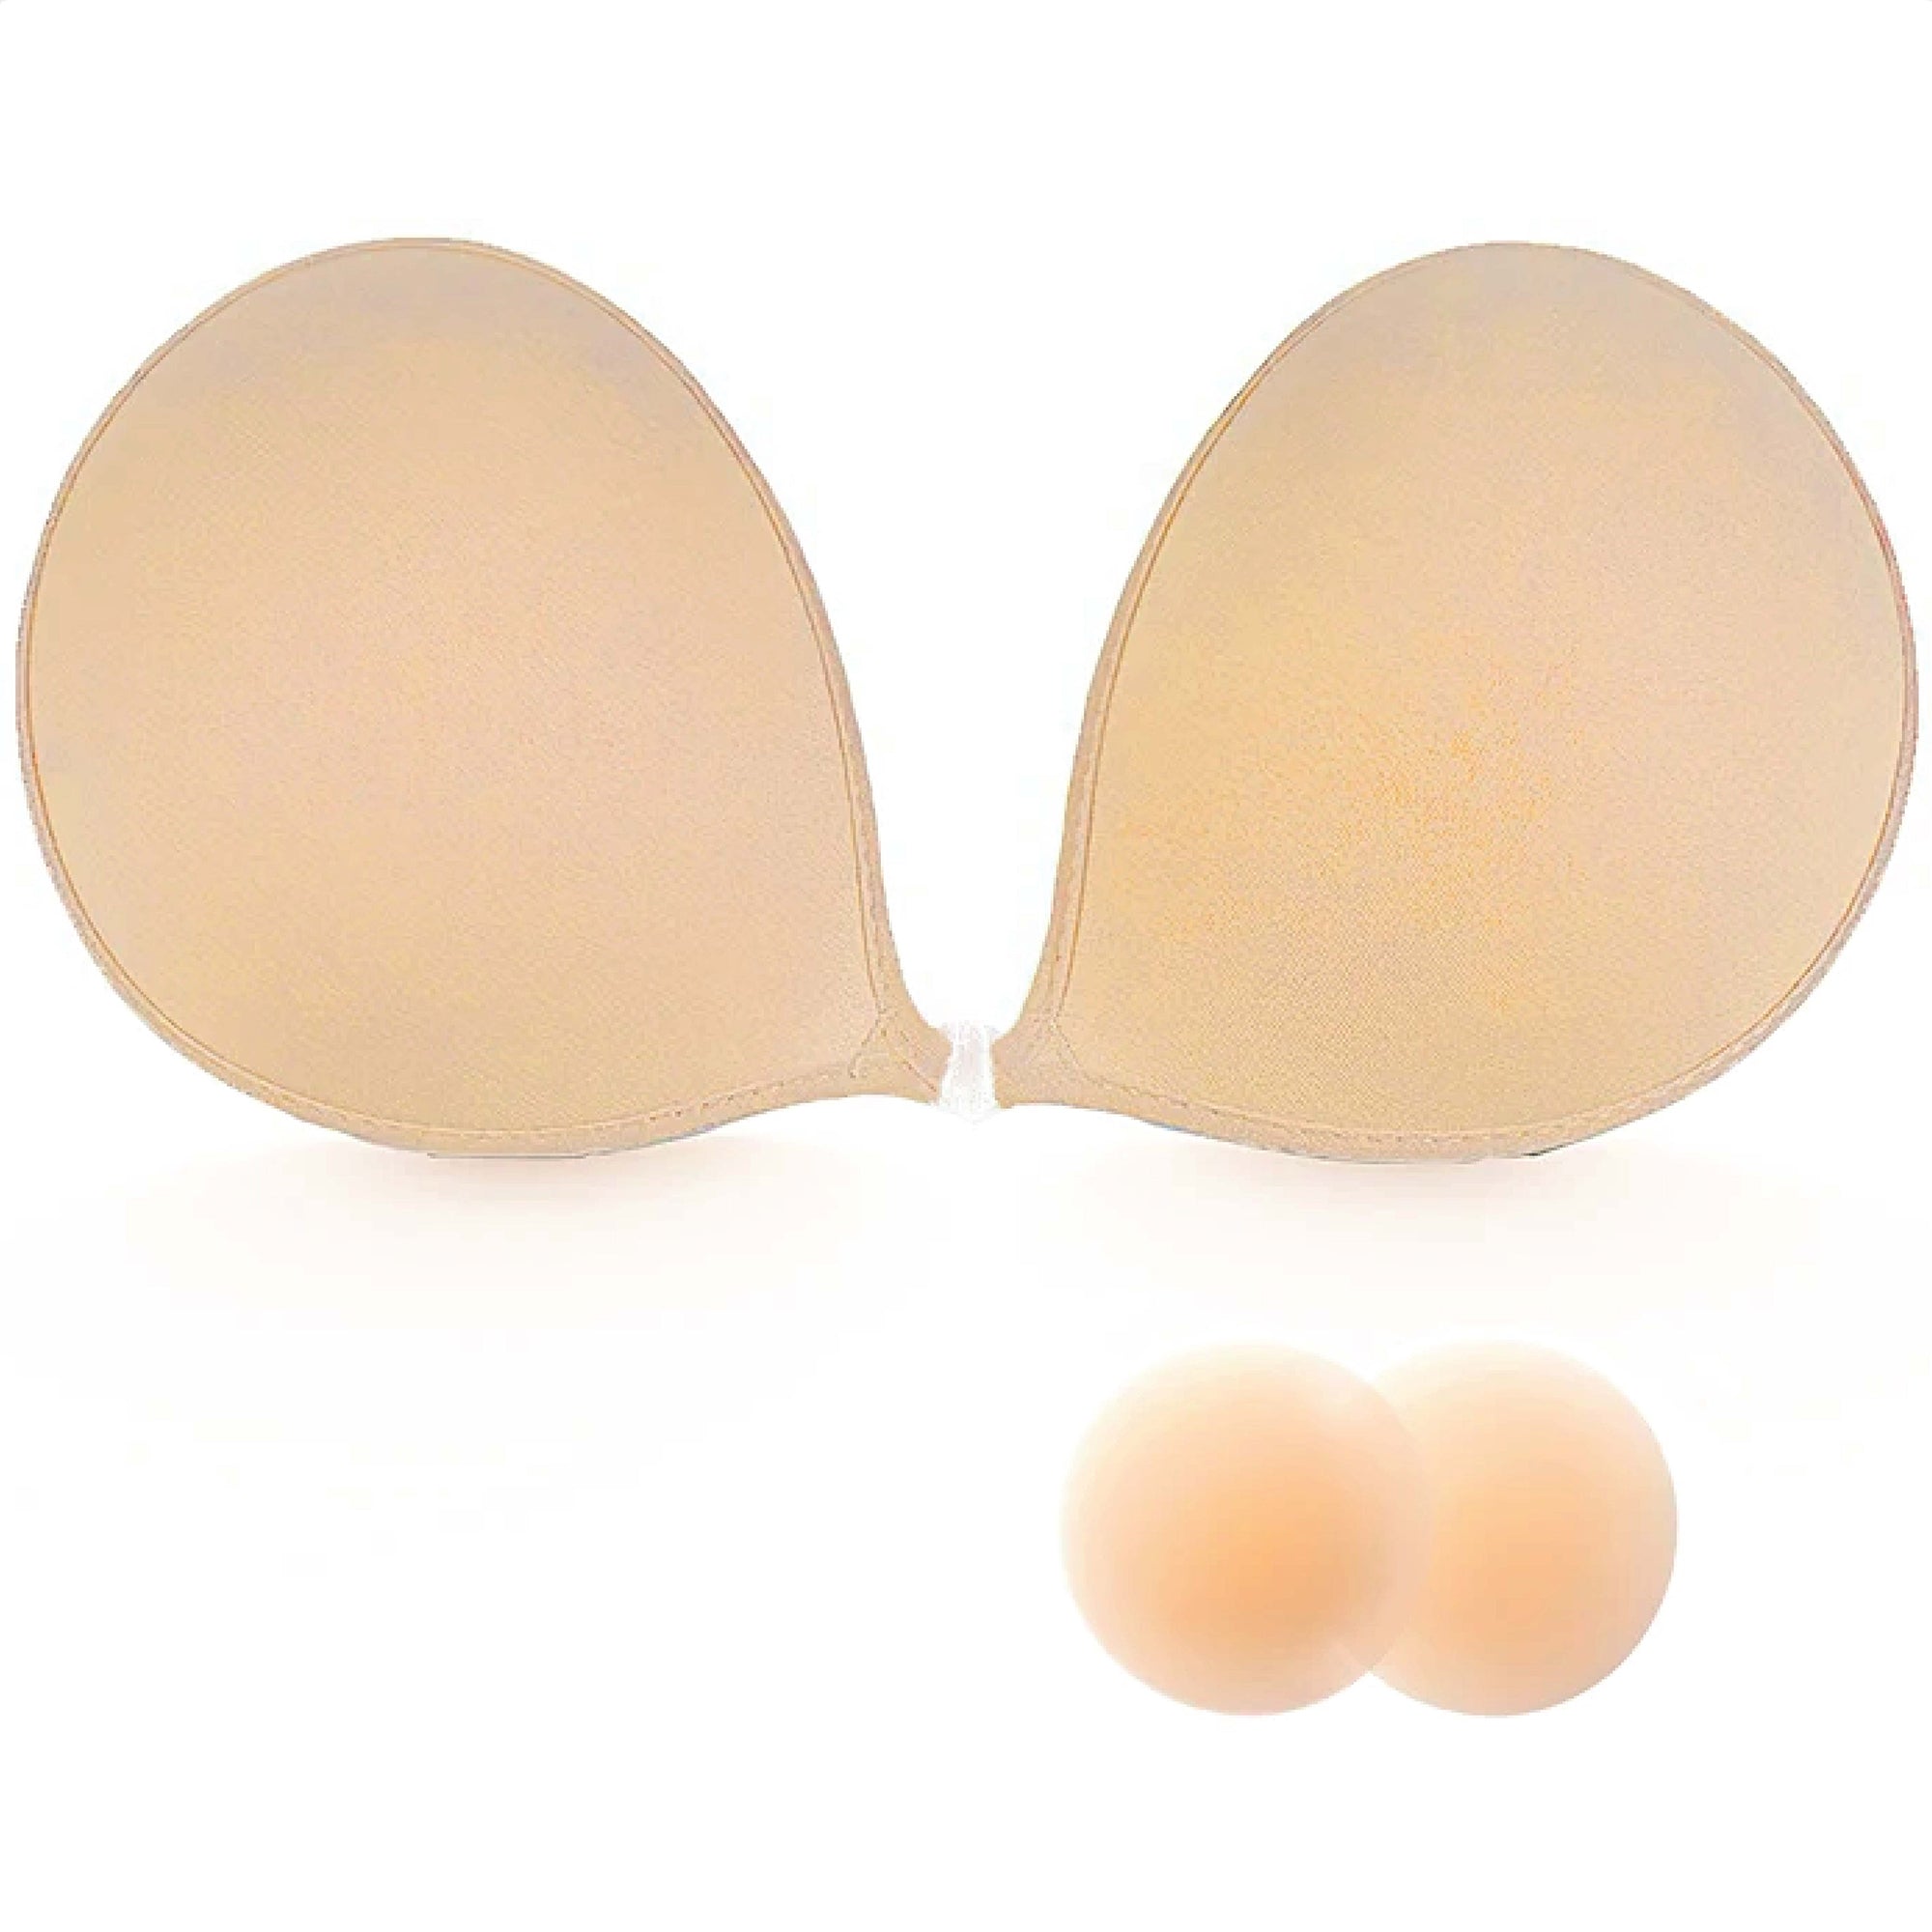 3pairs Beige Silicone Push Up Bra Pads For Small Breasts, Invisible Breast  Lift Tape For Backless Dress, Strapless Tops, Wedding, Formal Dresses,  Summer